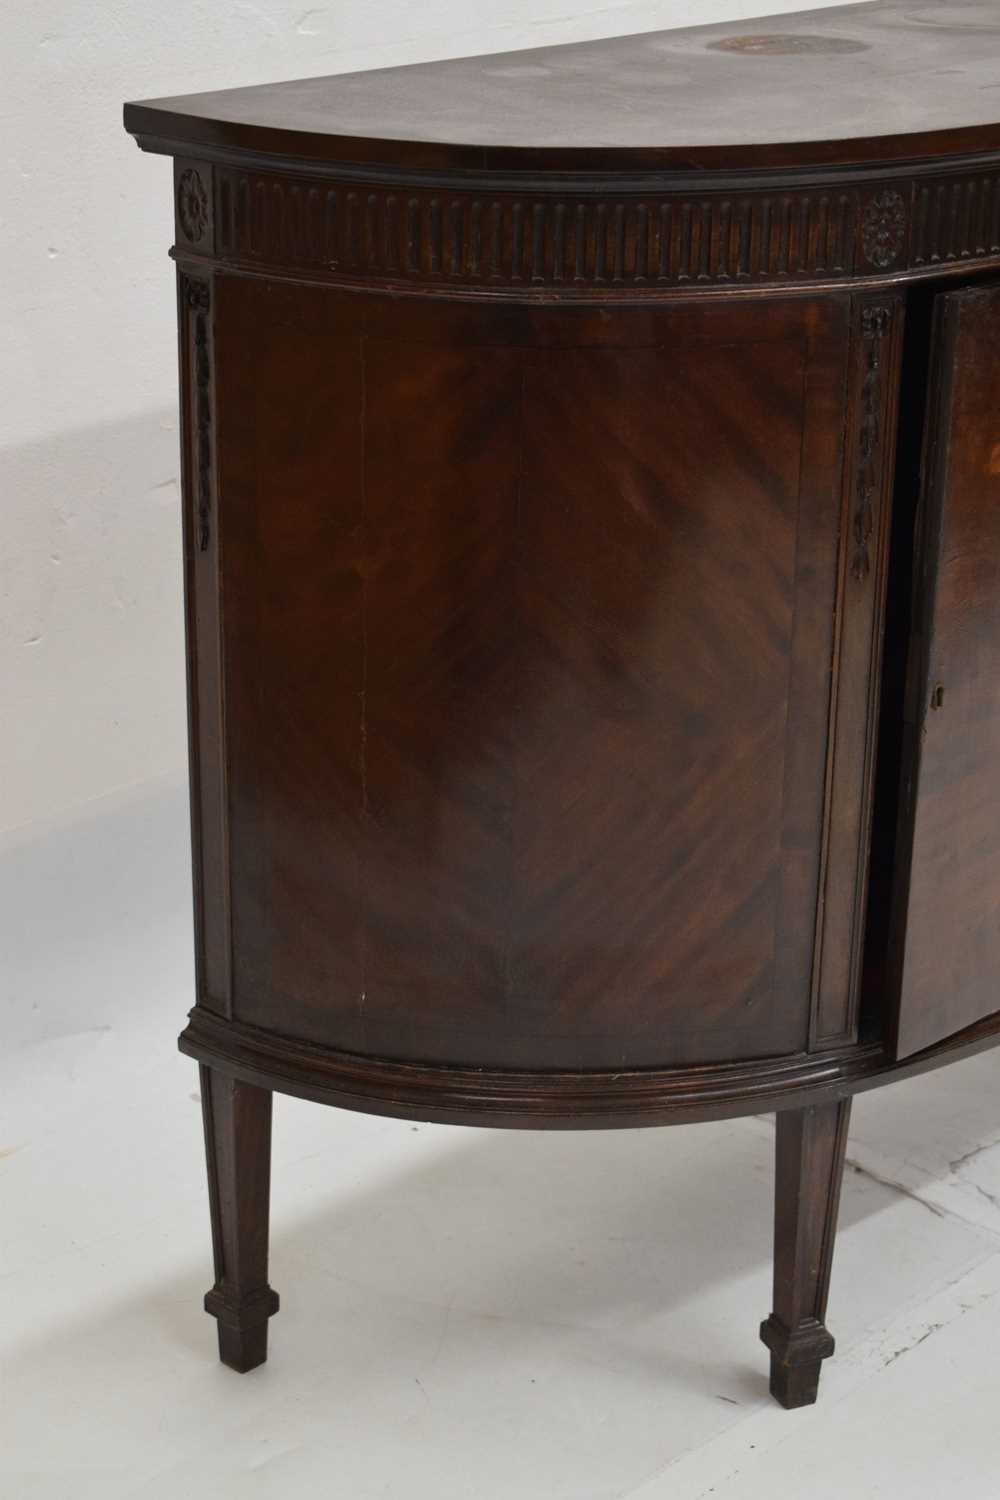 Pair of 1920s inlaid mahogany demi-lune side cabinets in the Adam Revival taste - Image 10 of 15